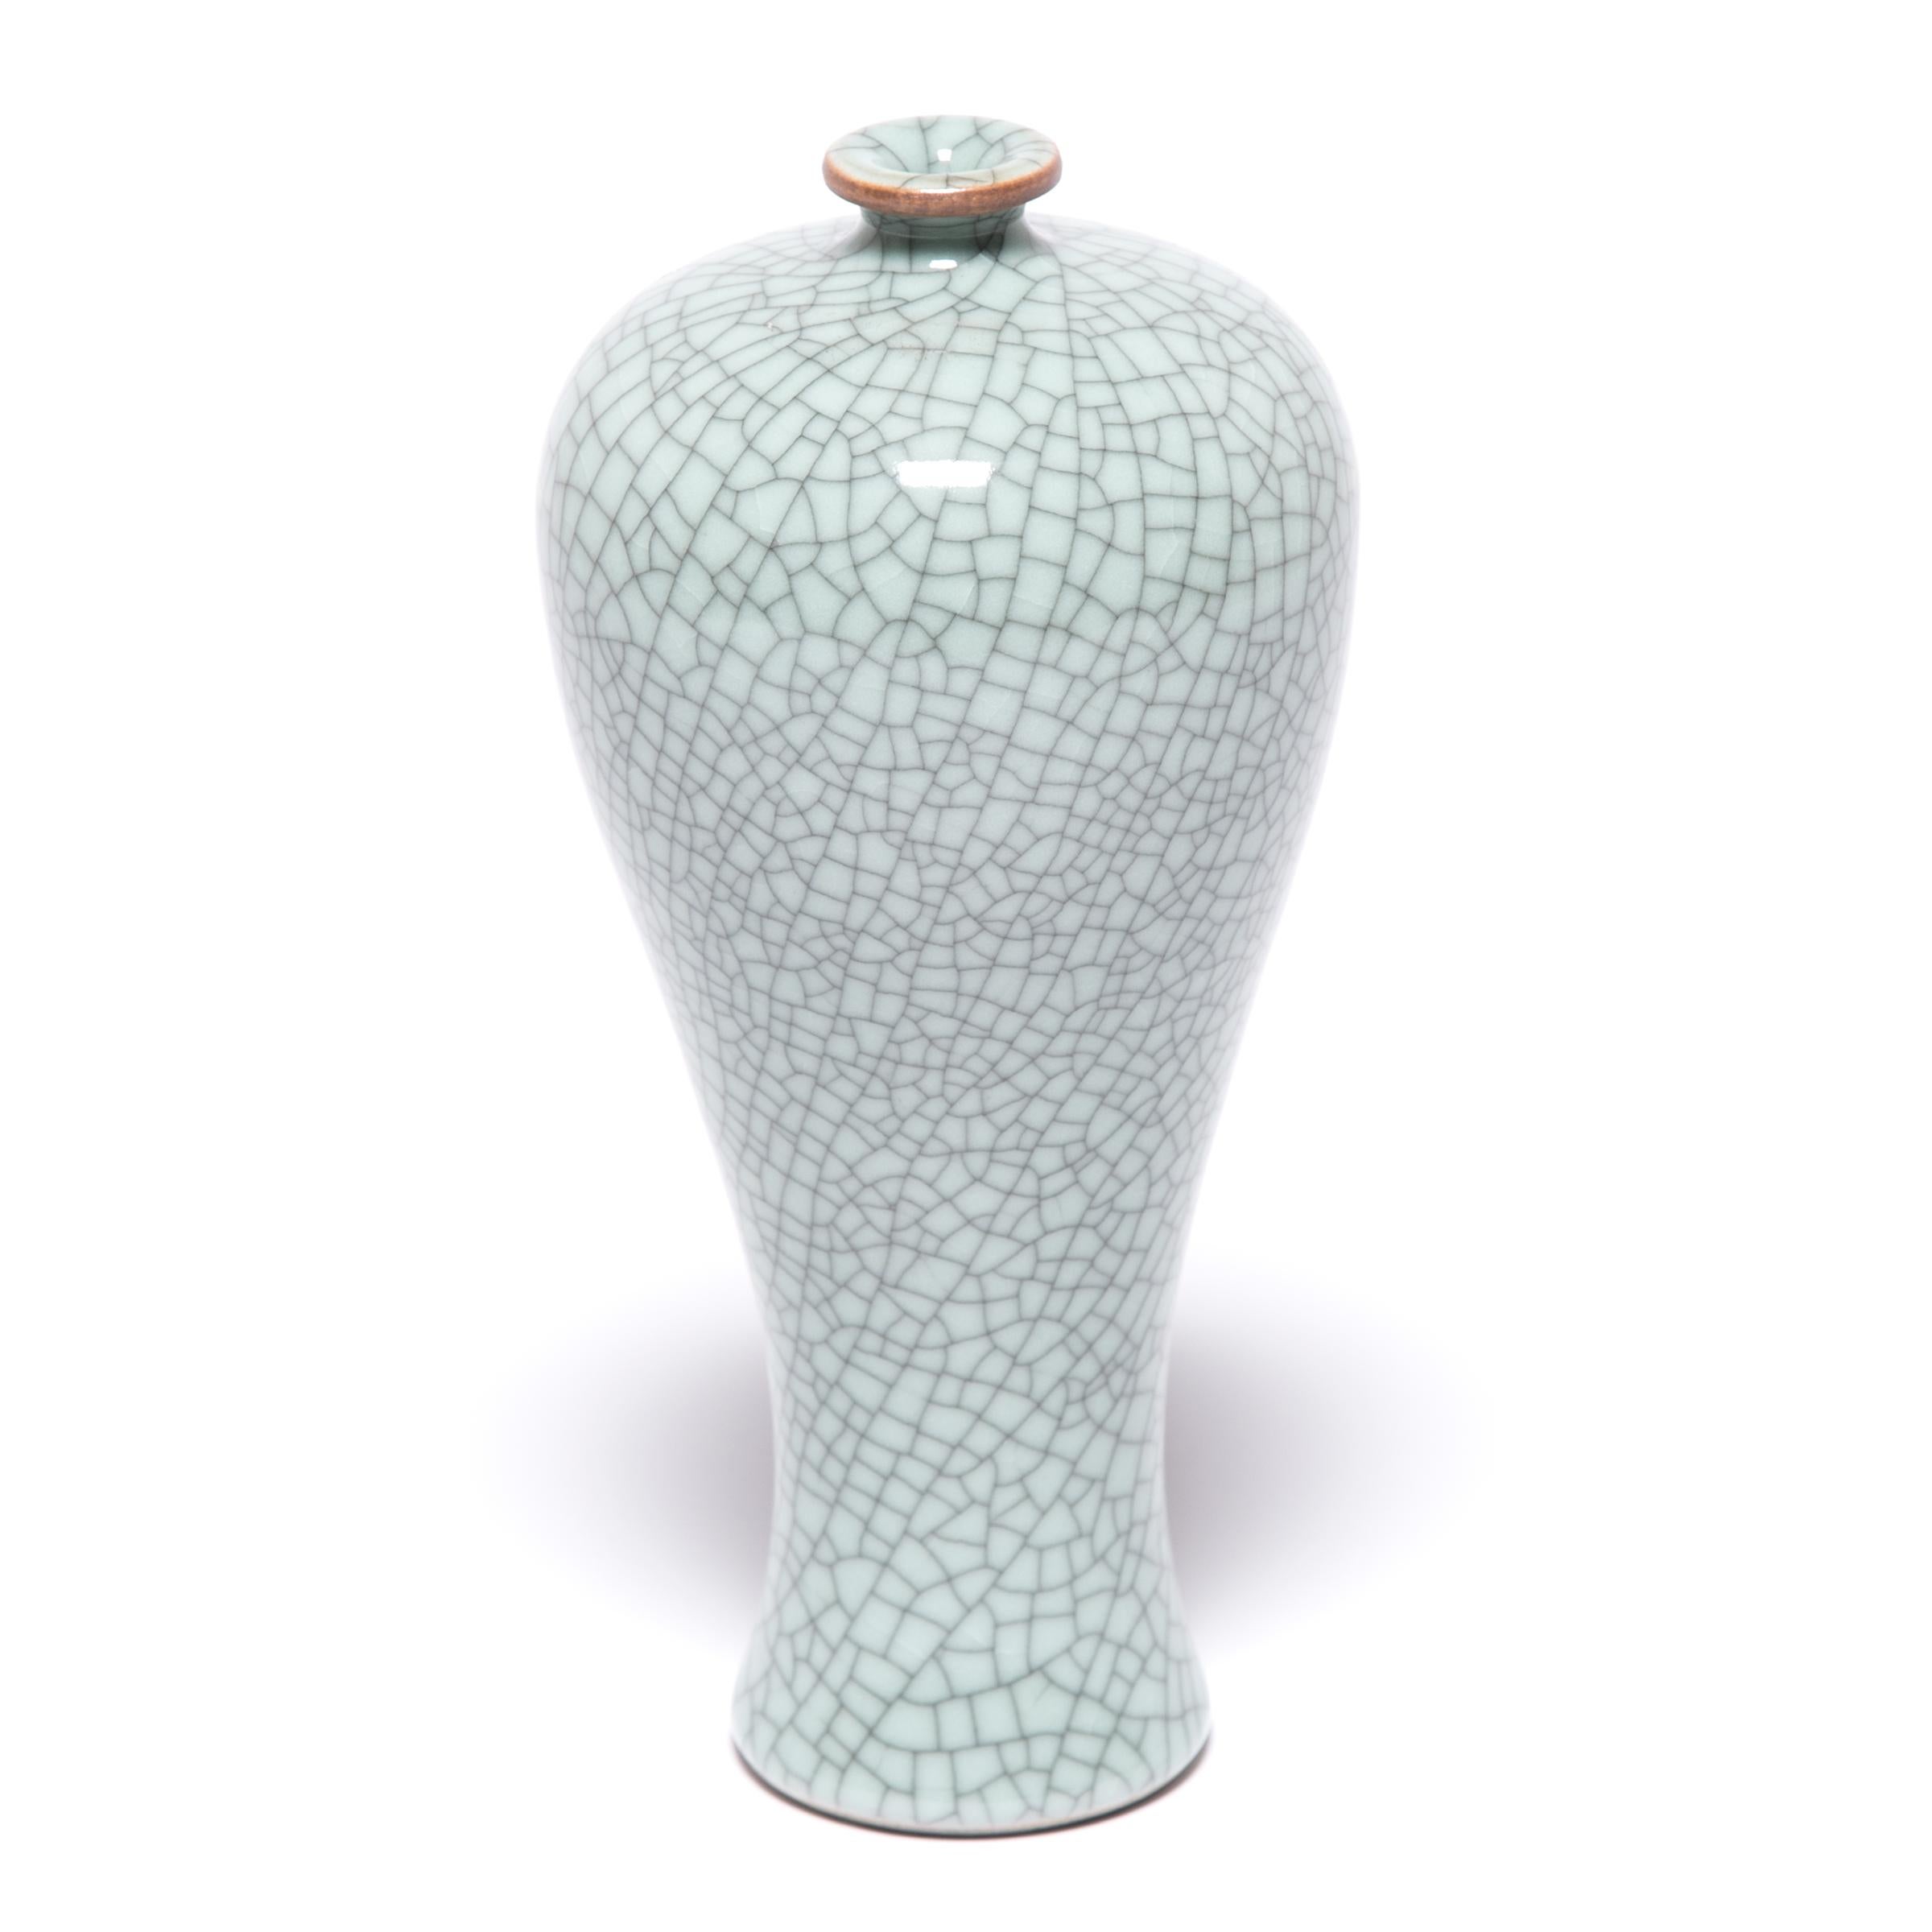 This contemporary vase hearkens to the Classic meiping form, traditionally used to display flowering plum branches. Contemporary artisans in Zhejiang beautifully recreate the distinctive crackle glaze of traditional Guan and Ge ware, allowing the